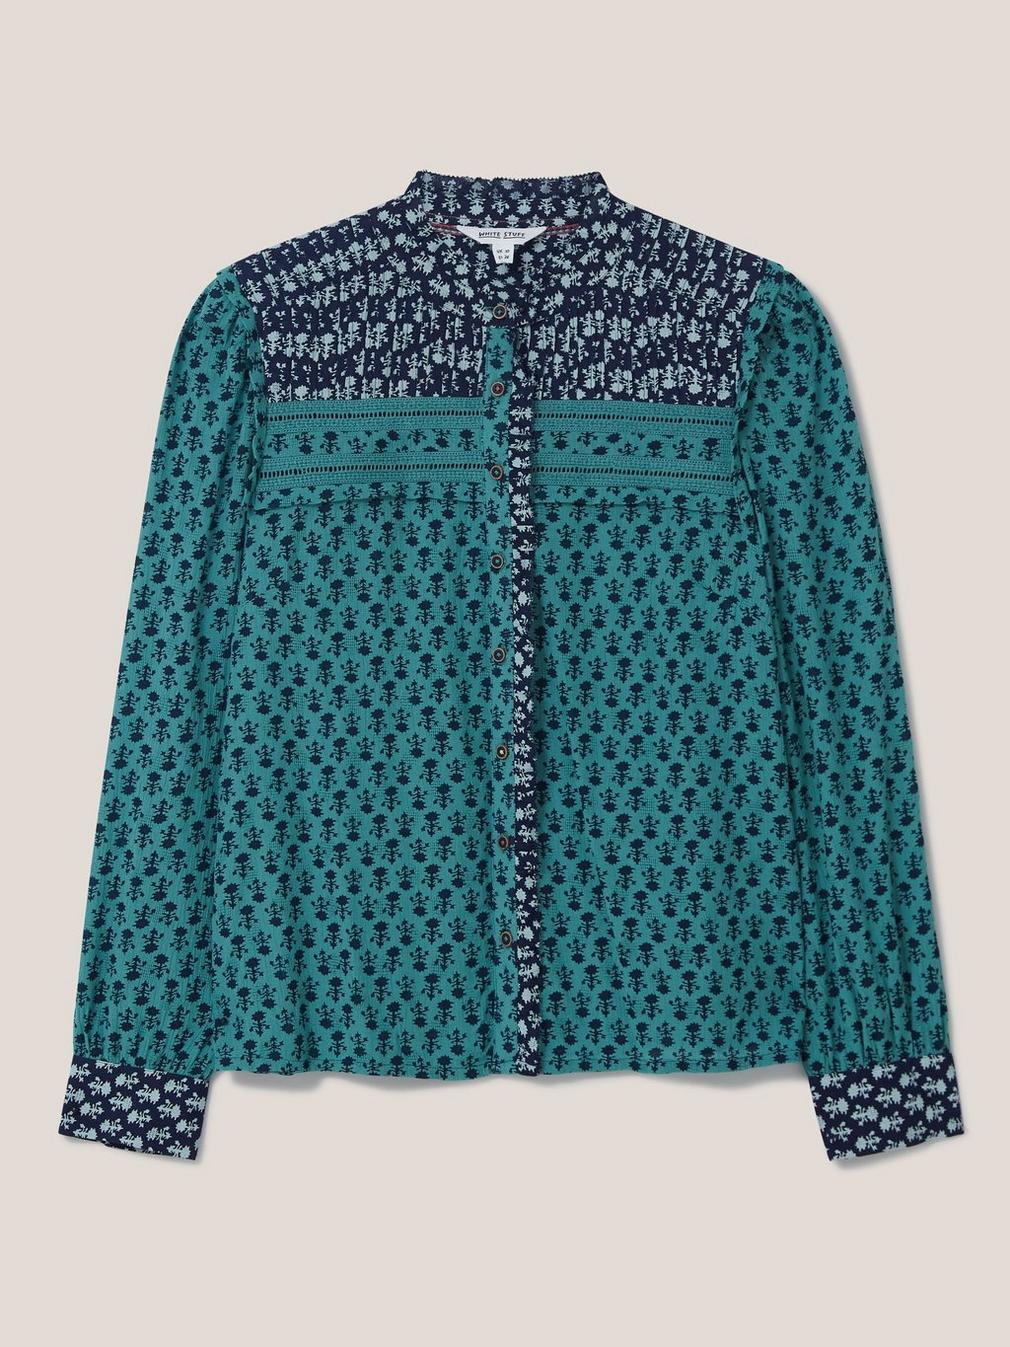 Mabel Mixed Print Shirt in TEAL MLT - FLAT FRONT